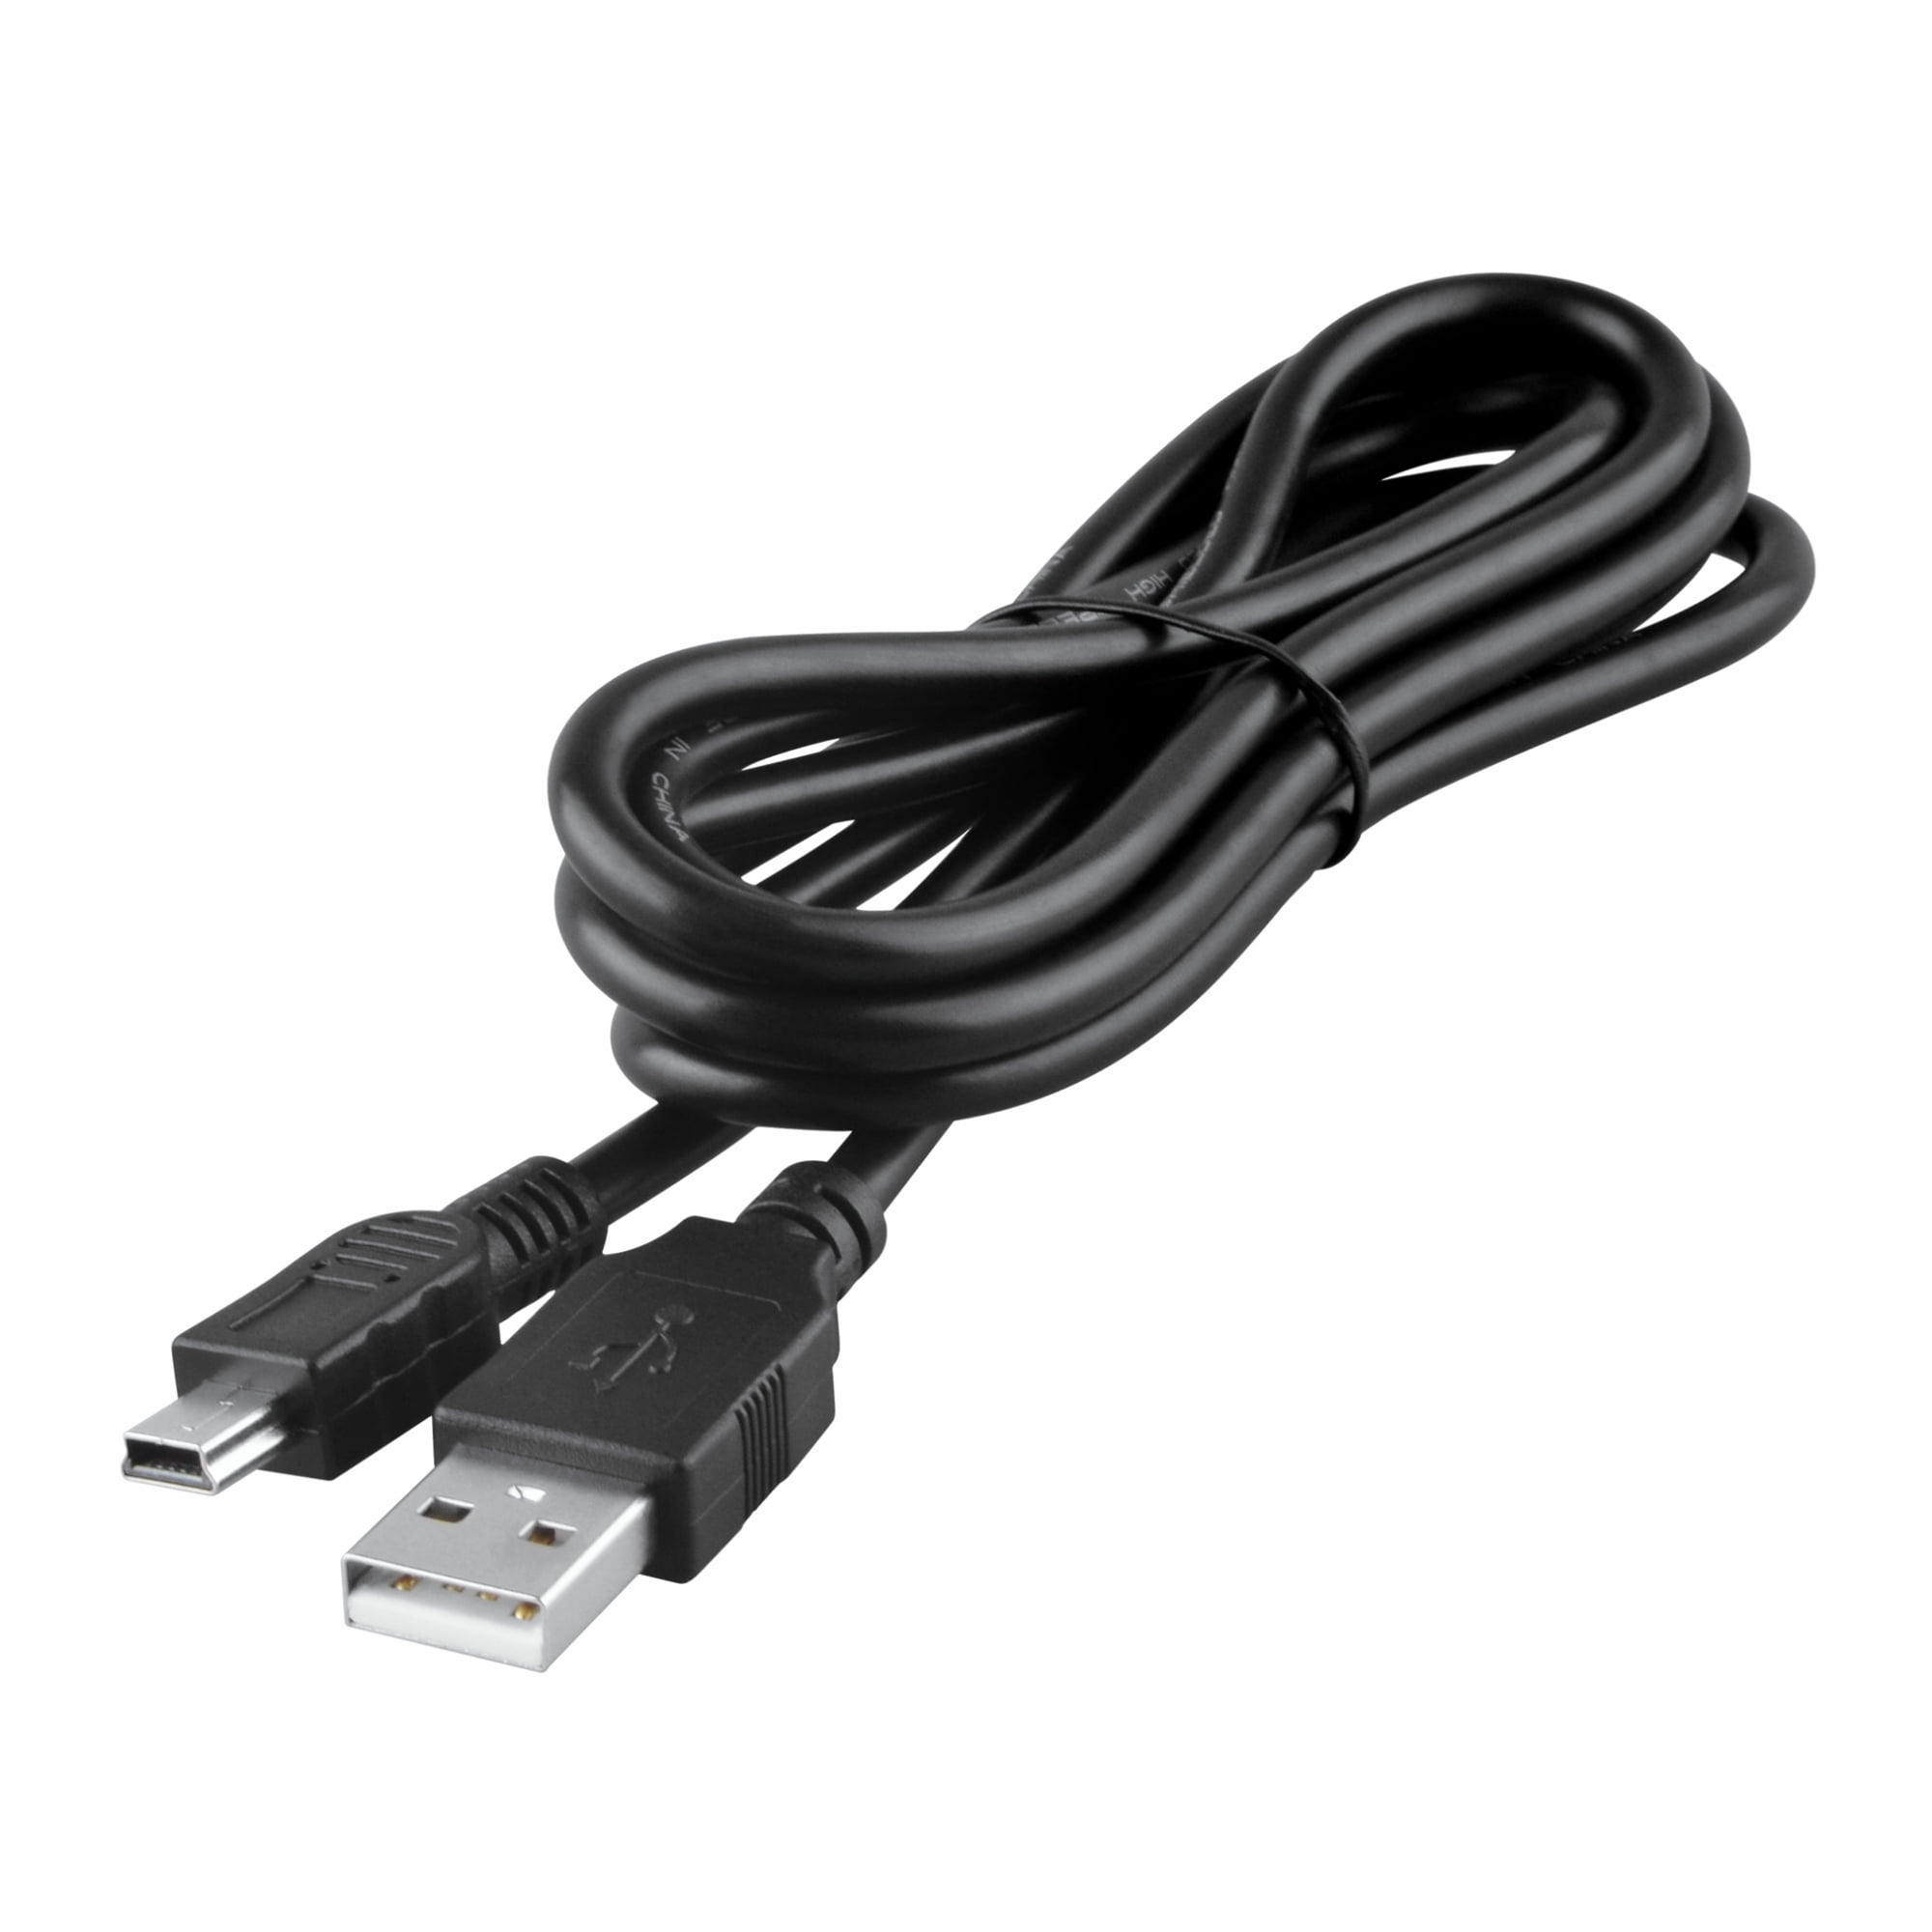 FITE ON UL Listed USB PC Charging Cable Cord Lead for Auvio PBT500 Portable Bluetooth Speaker 